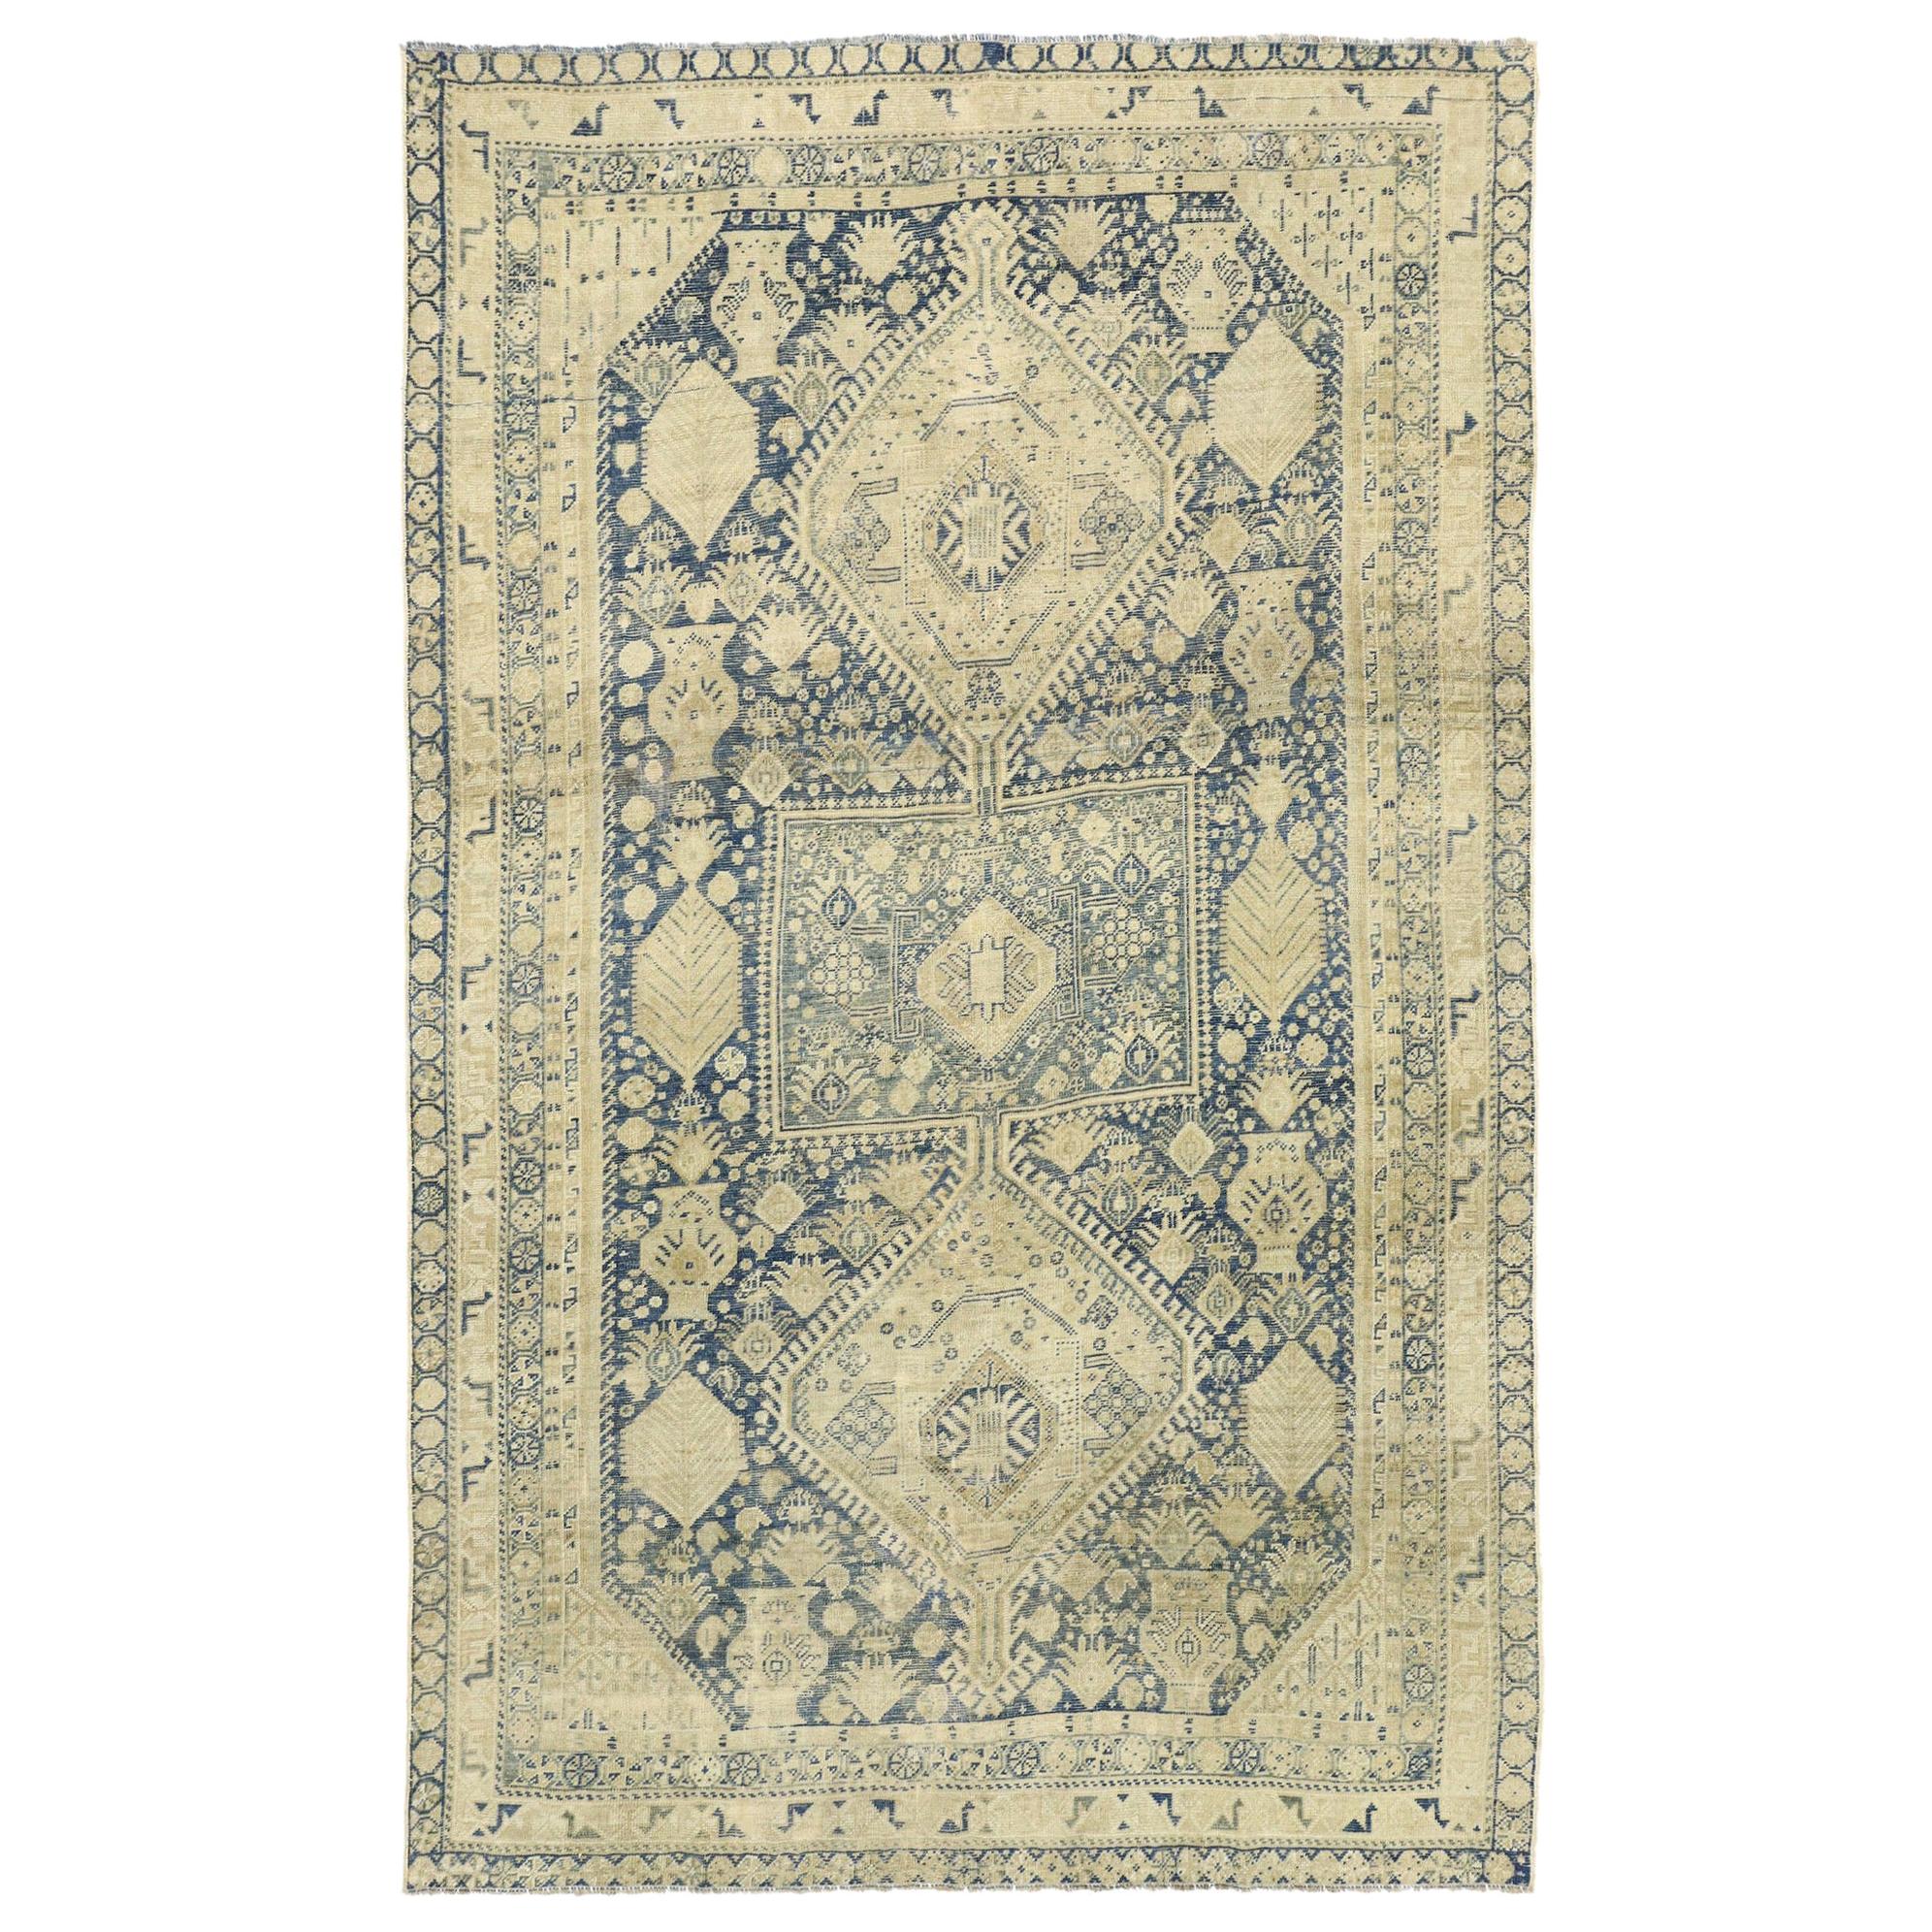 Distressed Antique Persian Shiraz Design Rug with British Colonial Style For Sale